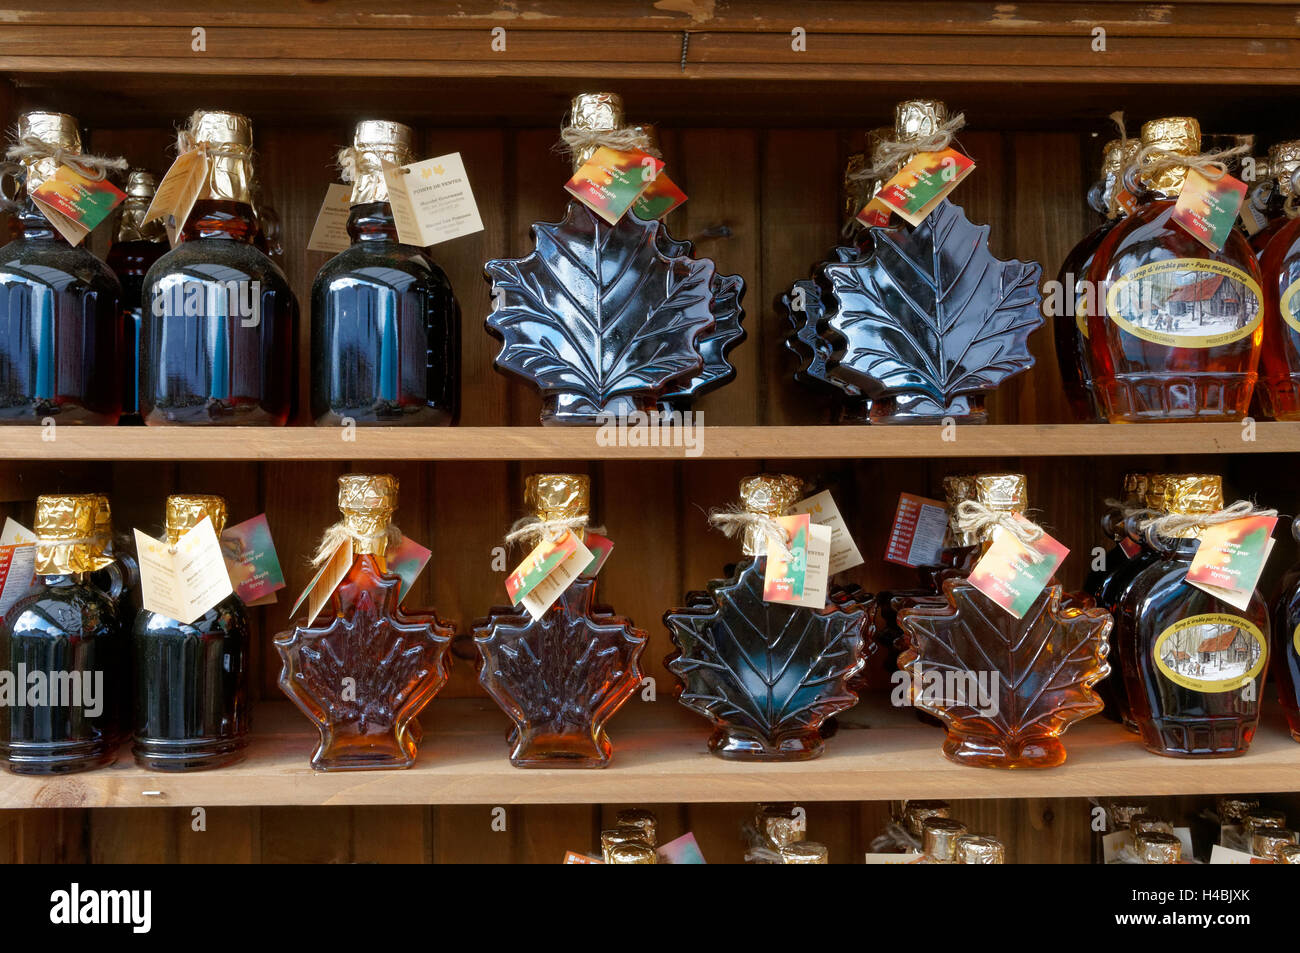 Bottles of Canadian maple syrup lined up on shelves at the Jean Talon Market, Montreal, Quebec, Canada Stock Photo